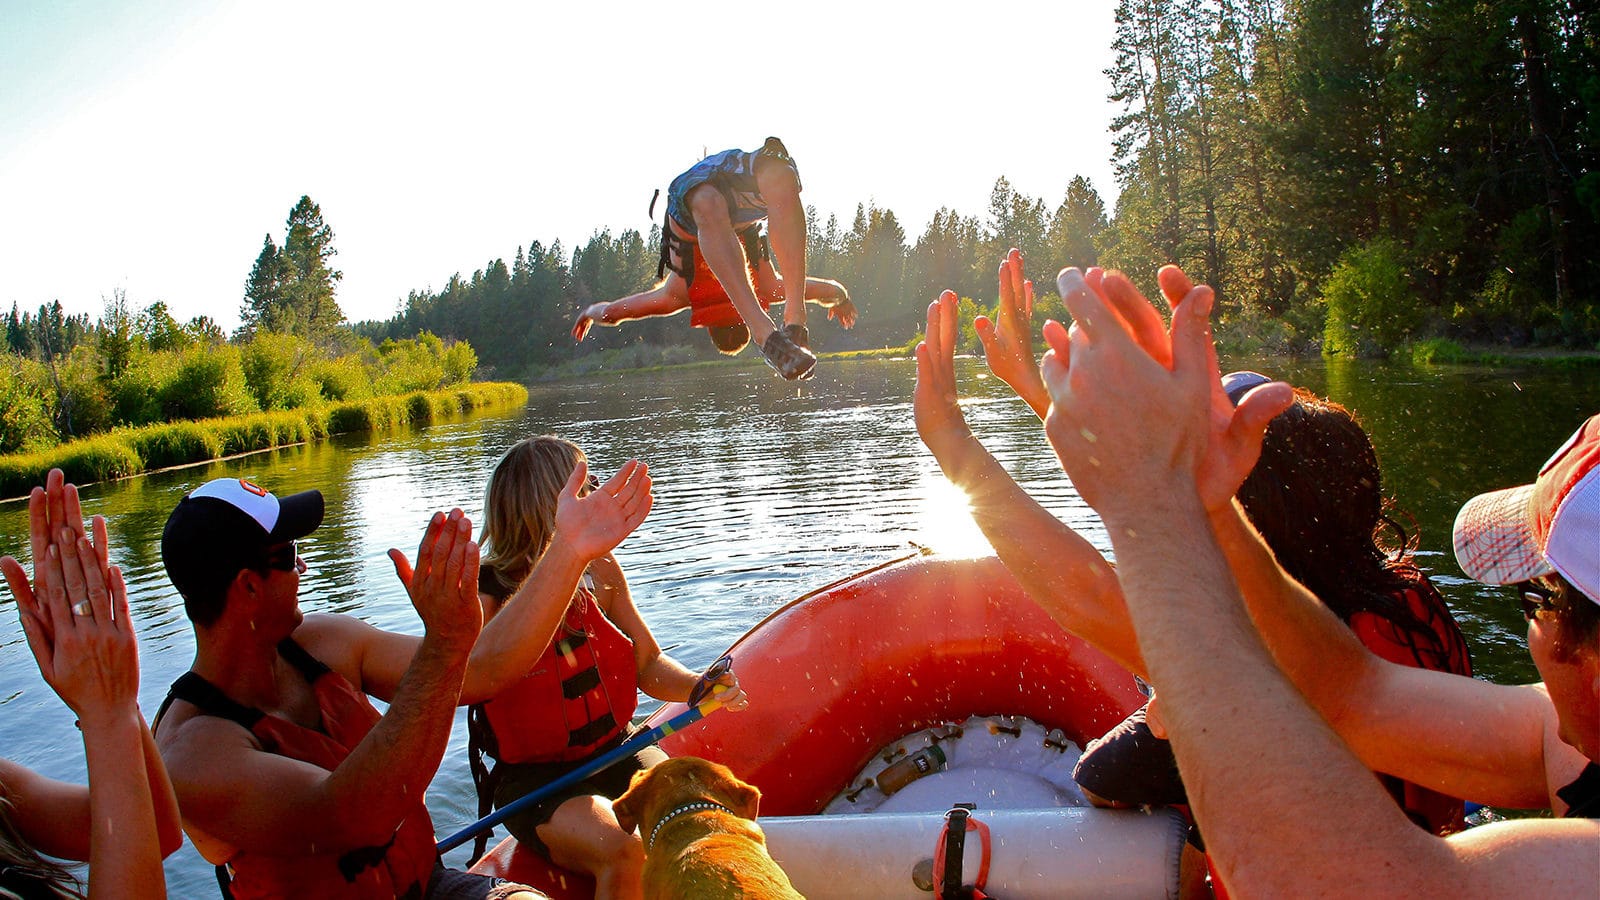 Whitewater rafting in Bend, Oregon